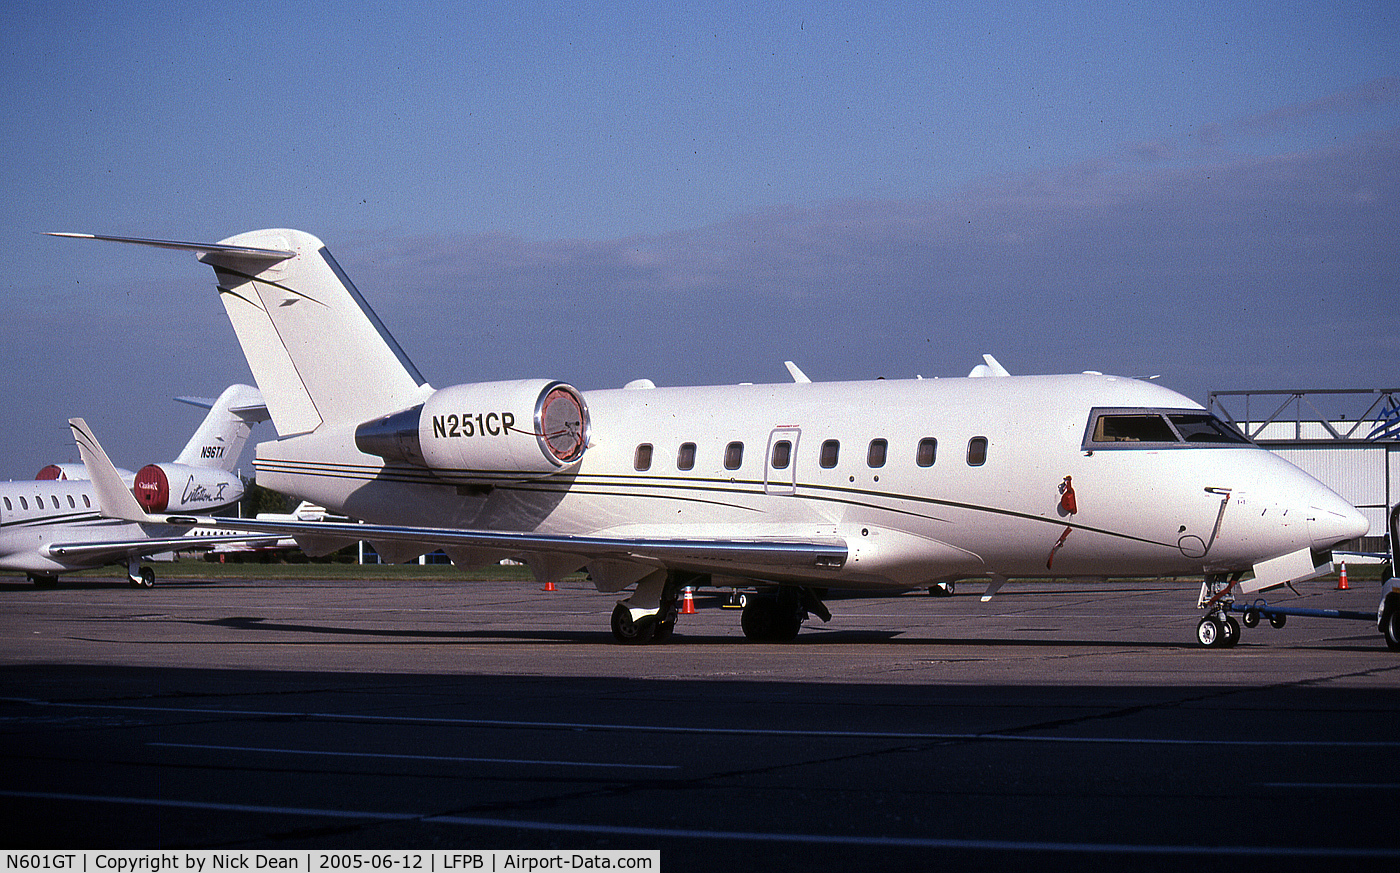 N601GT, 2002 Bombardier Challenger 604 (CL-600-2B16) C/N 5524, LFPB (Seen here as N251CP this frame is currently registered N601GT as posted)